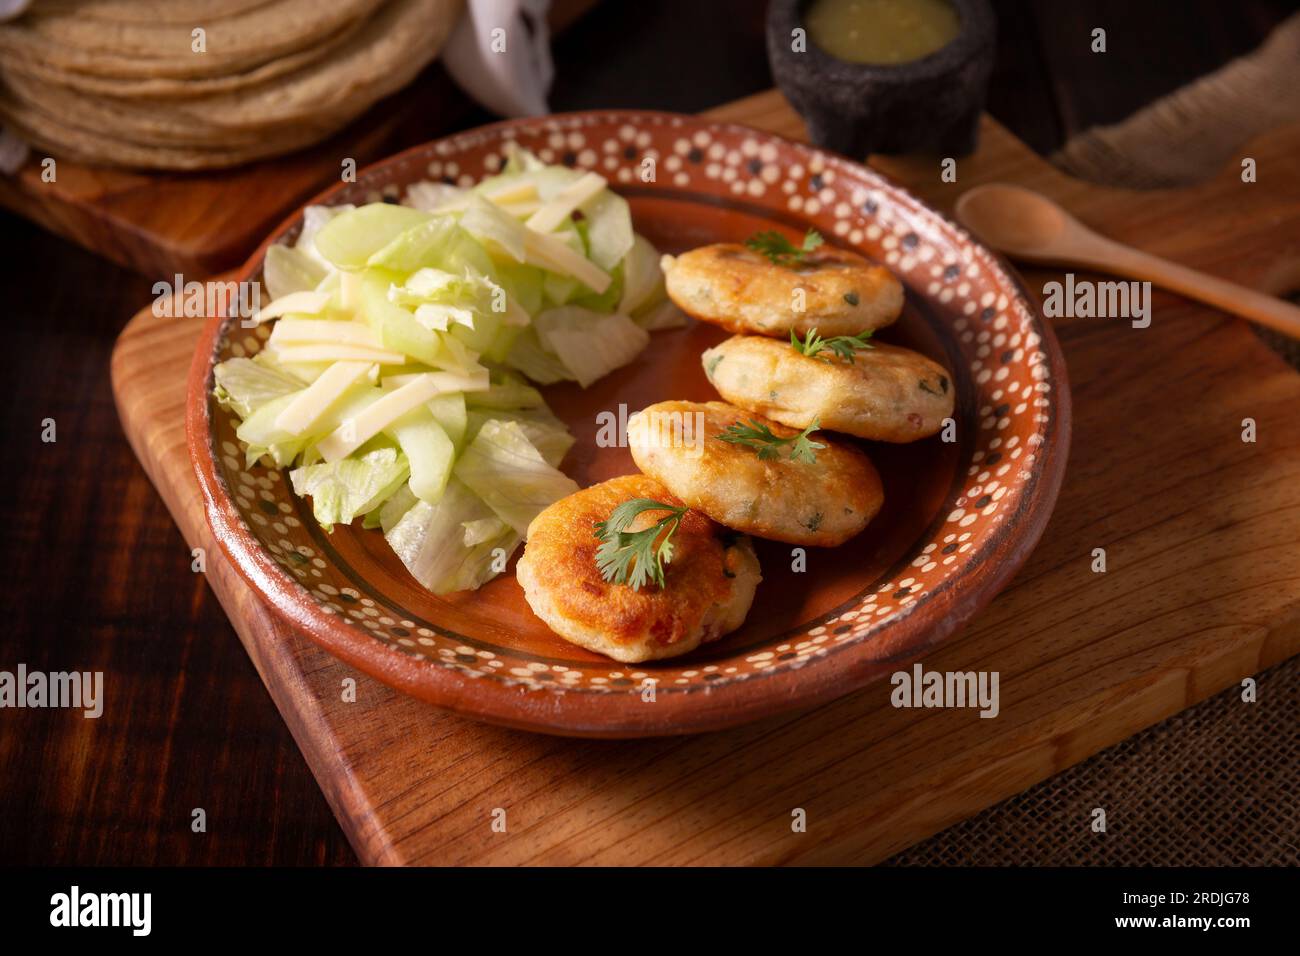 Potato pancakes, a very popular homemade dish in many countries, in traditional Mexican cuisine they are known as 'Tortitas de Papa', it is an easy, f Stock Photo